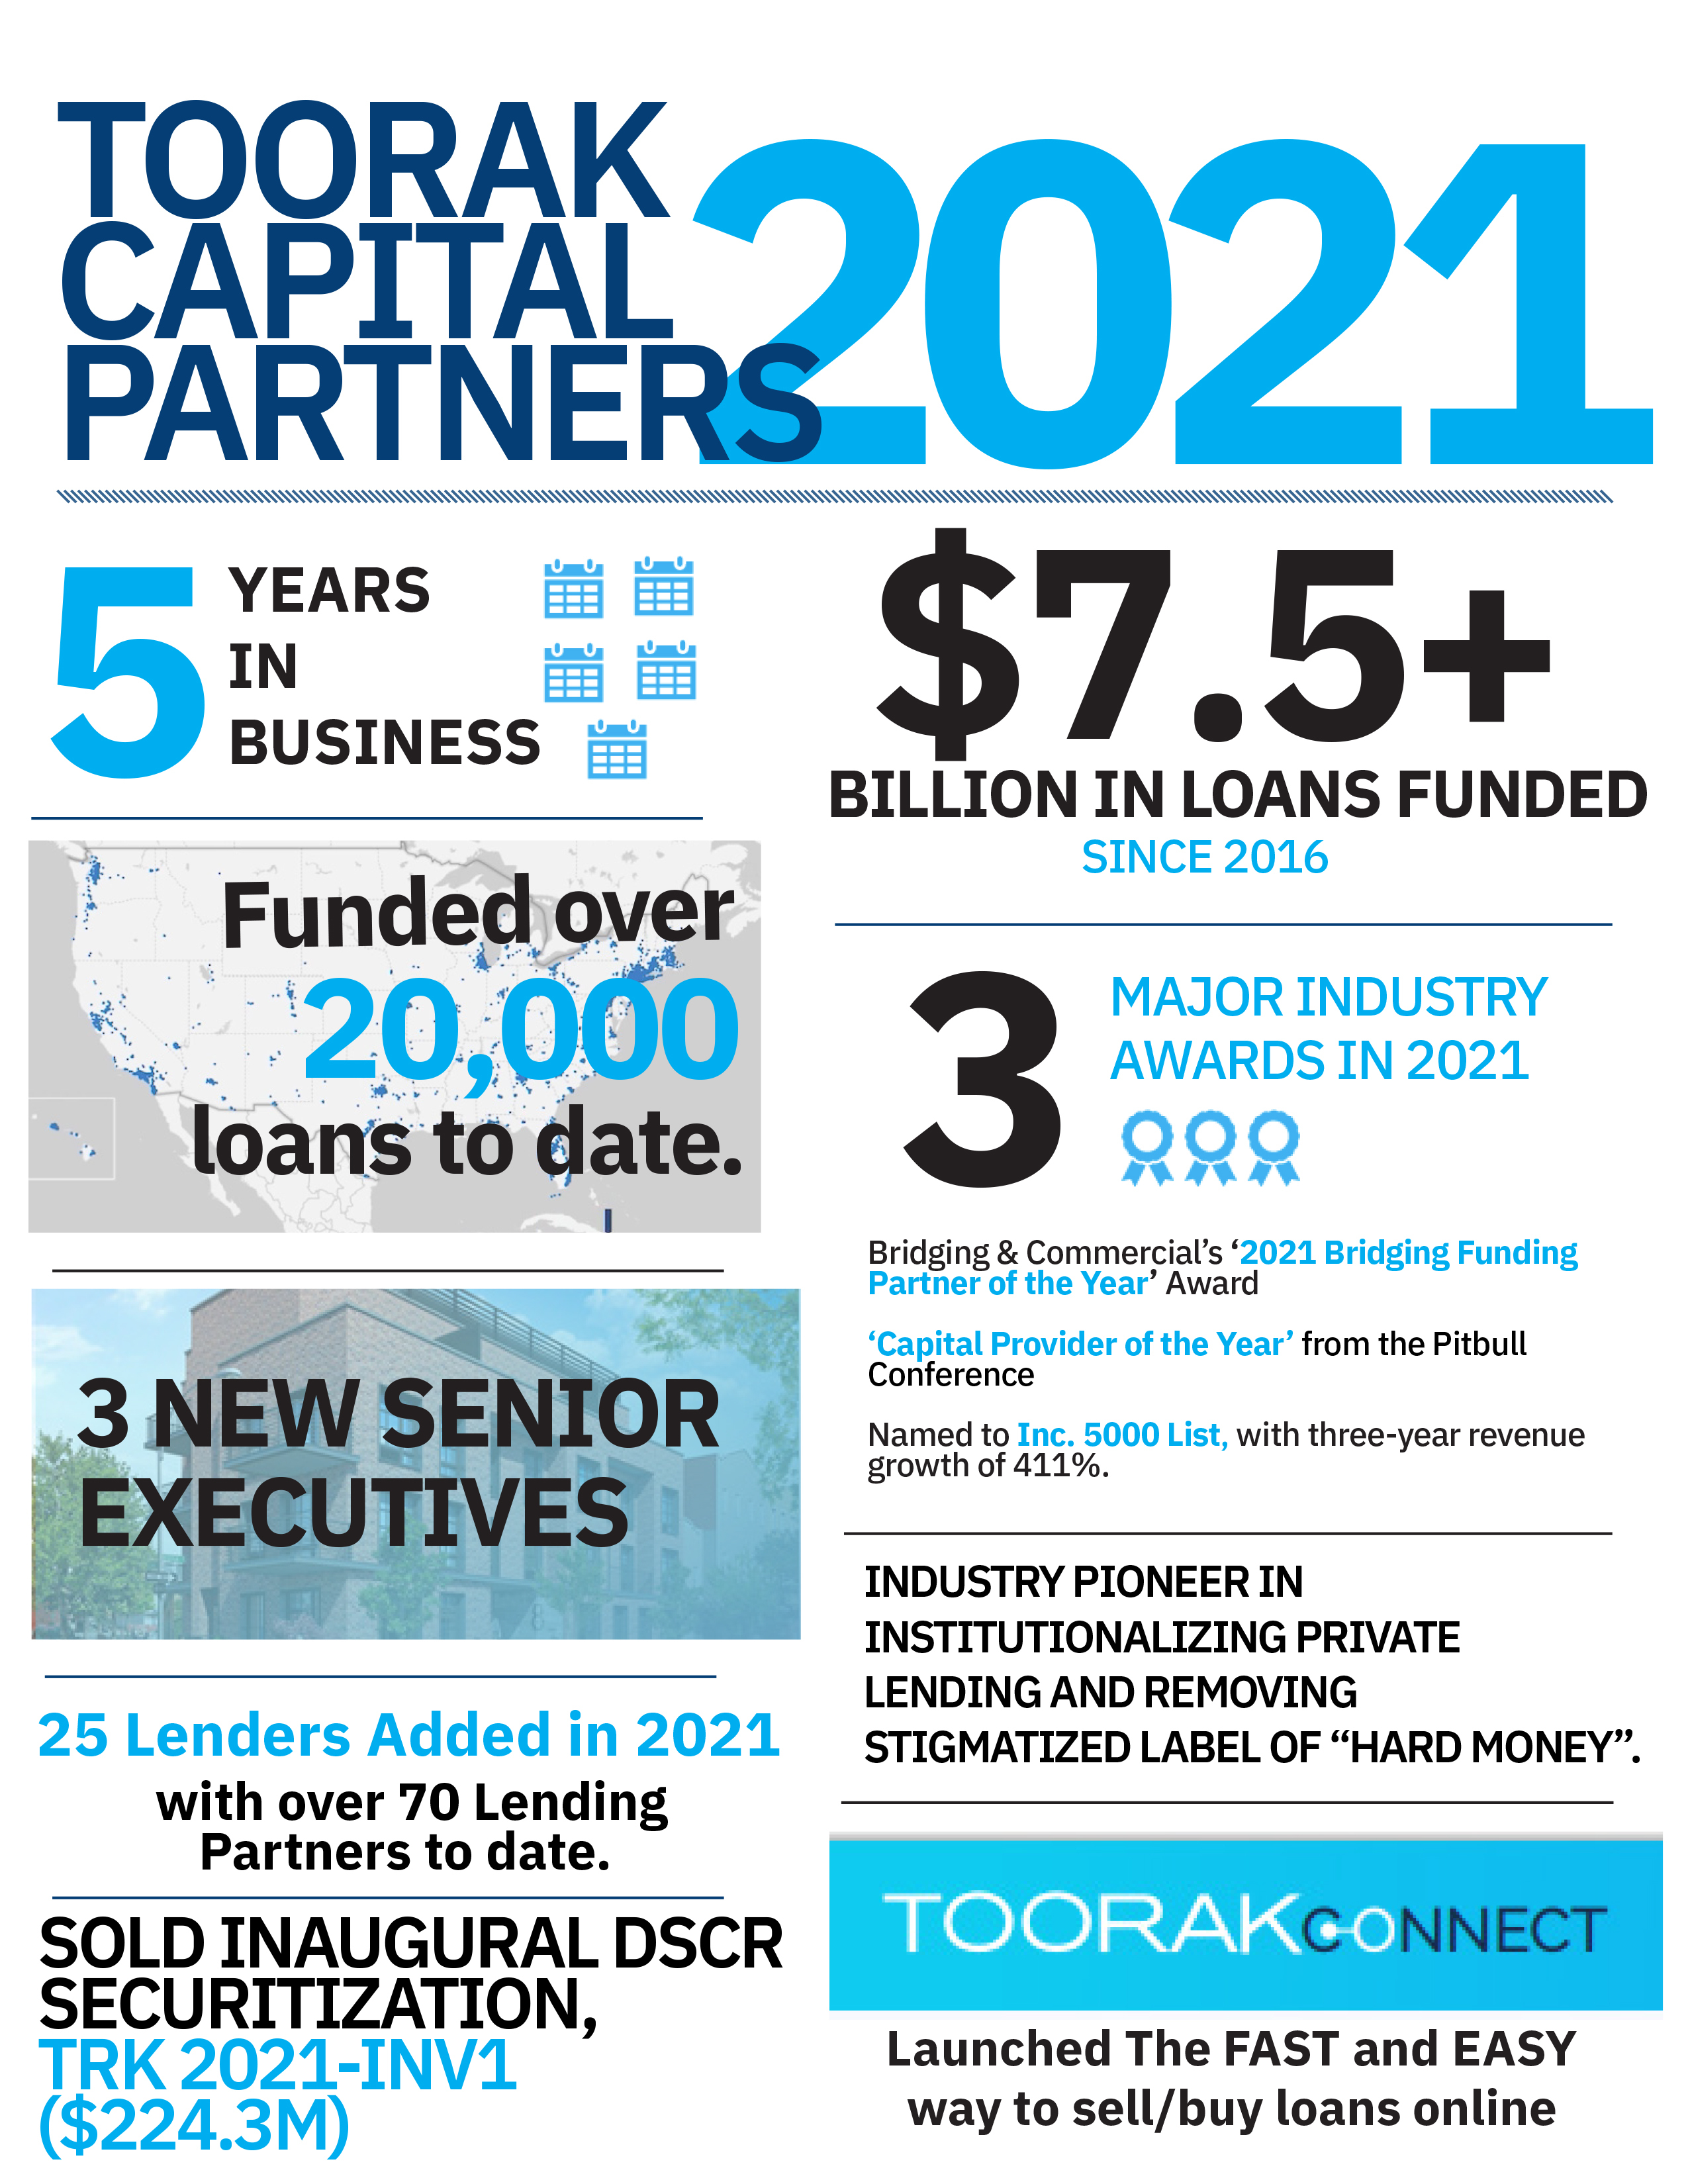 Toorak Capital Partners 2021 Year In Review | Business Wire